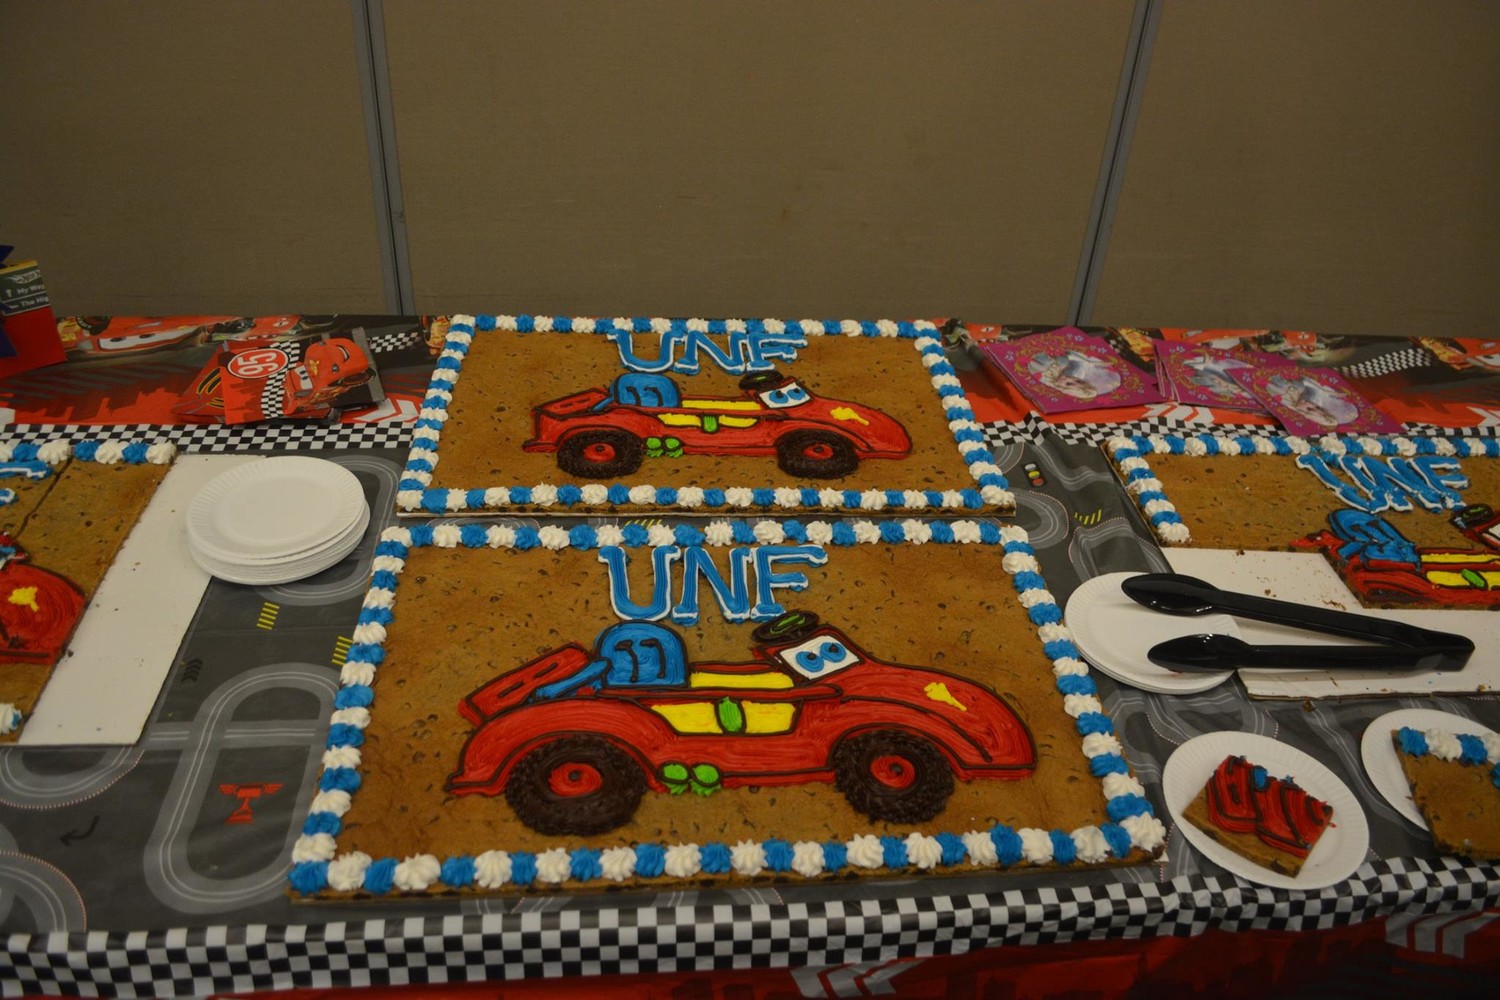 An Adoptive Toy Project-themed cake is displayed at the event.